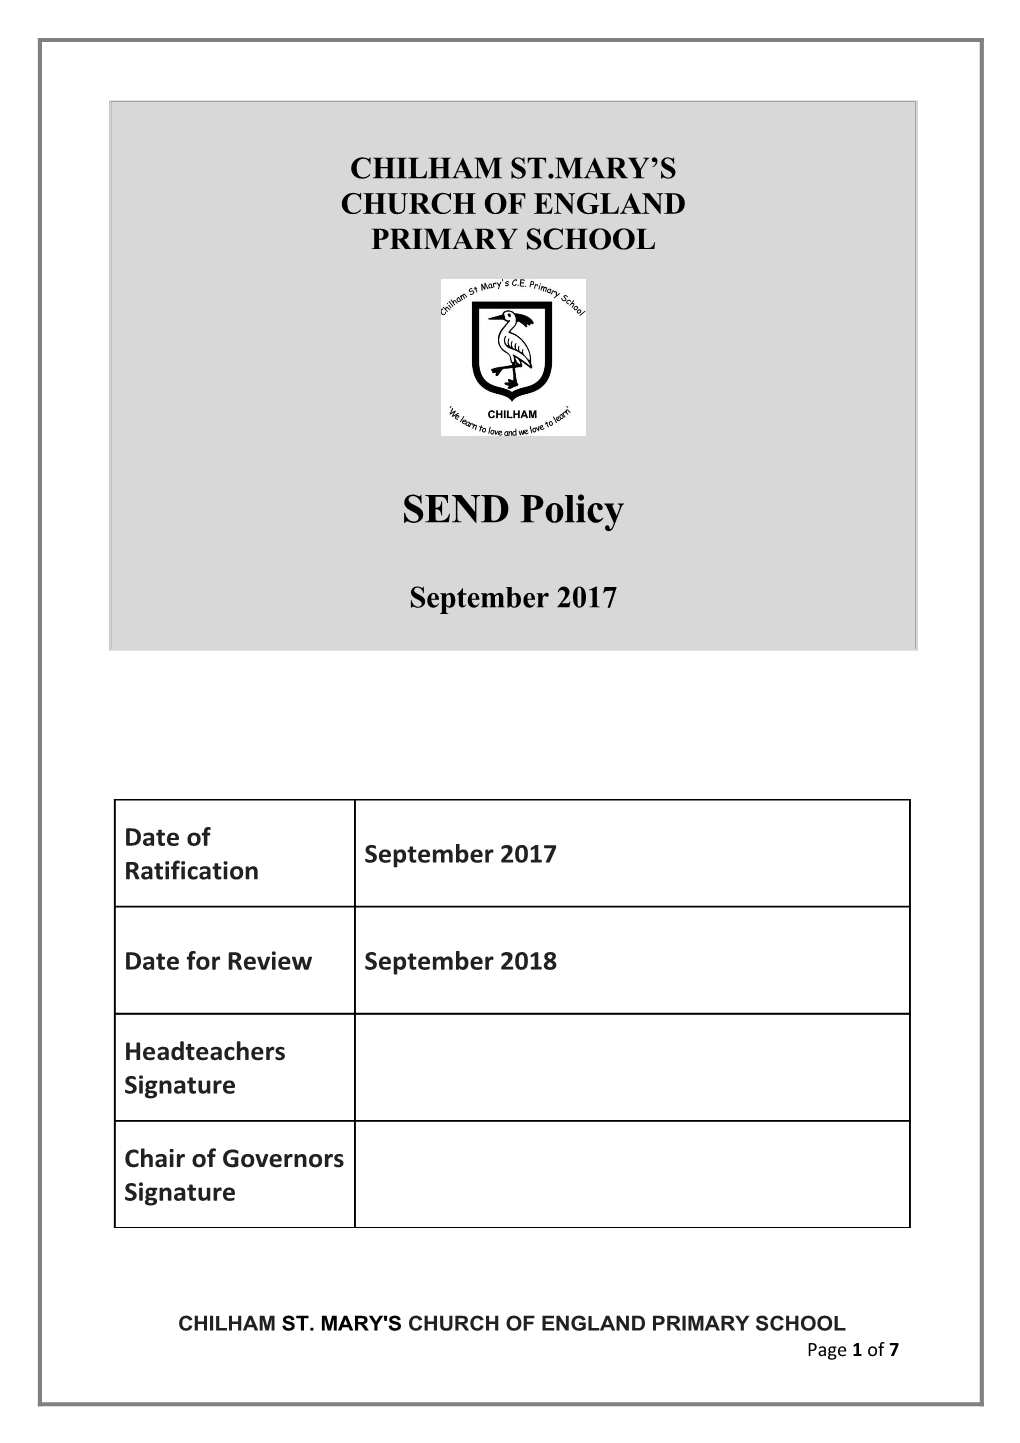 Special Educational Needs Policy (SEN Policy)